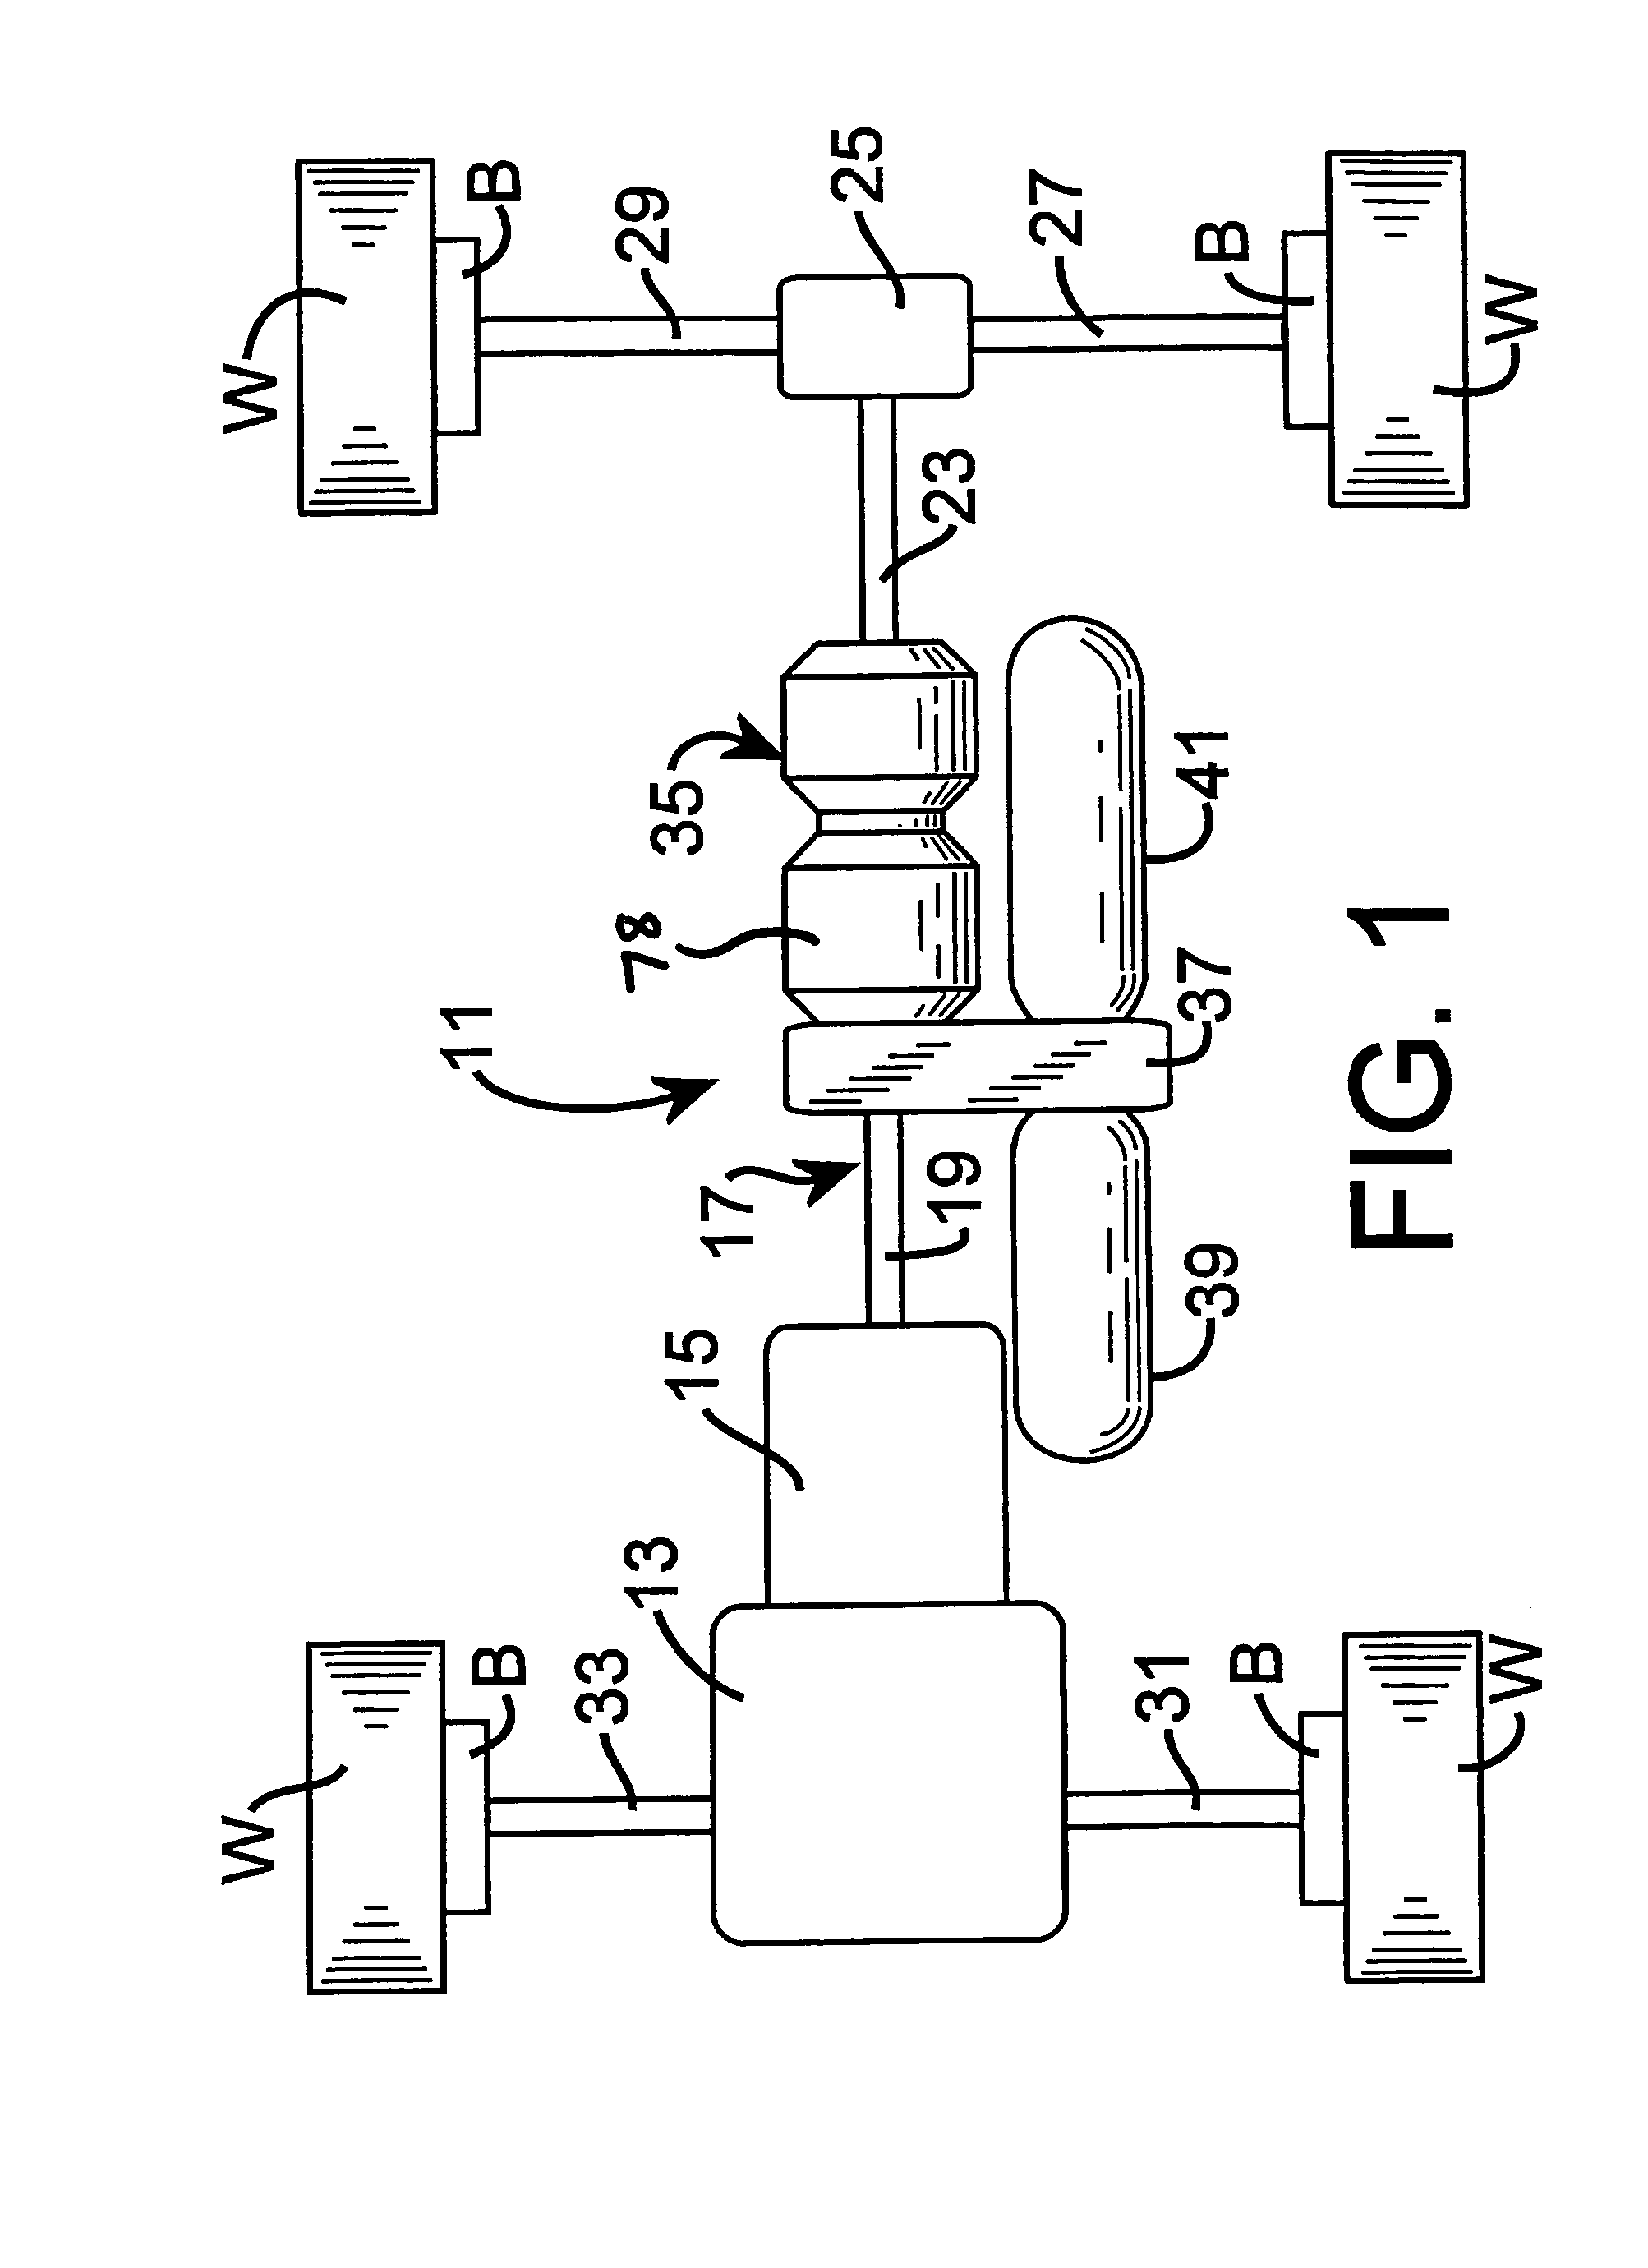 Hydraulic drive system and improved control valve assembly therefor